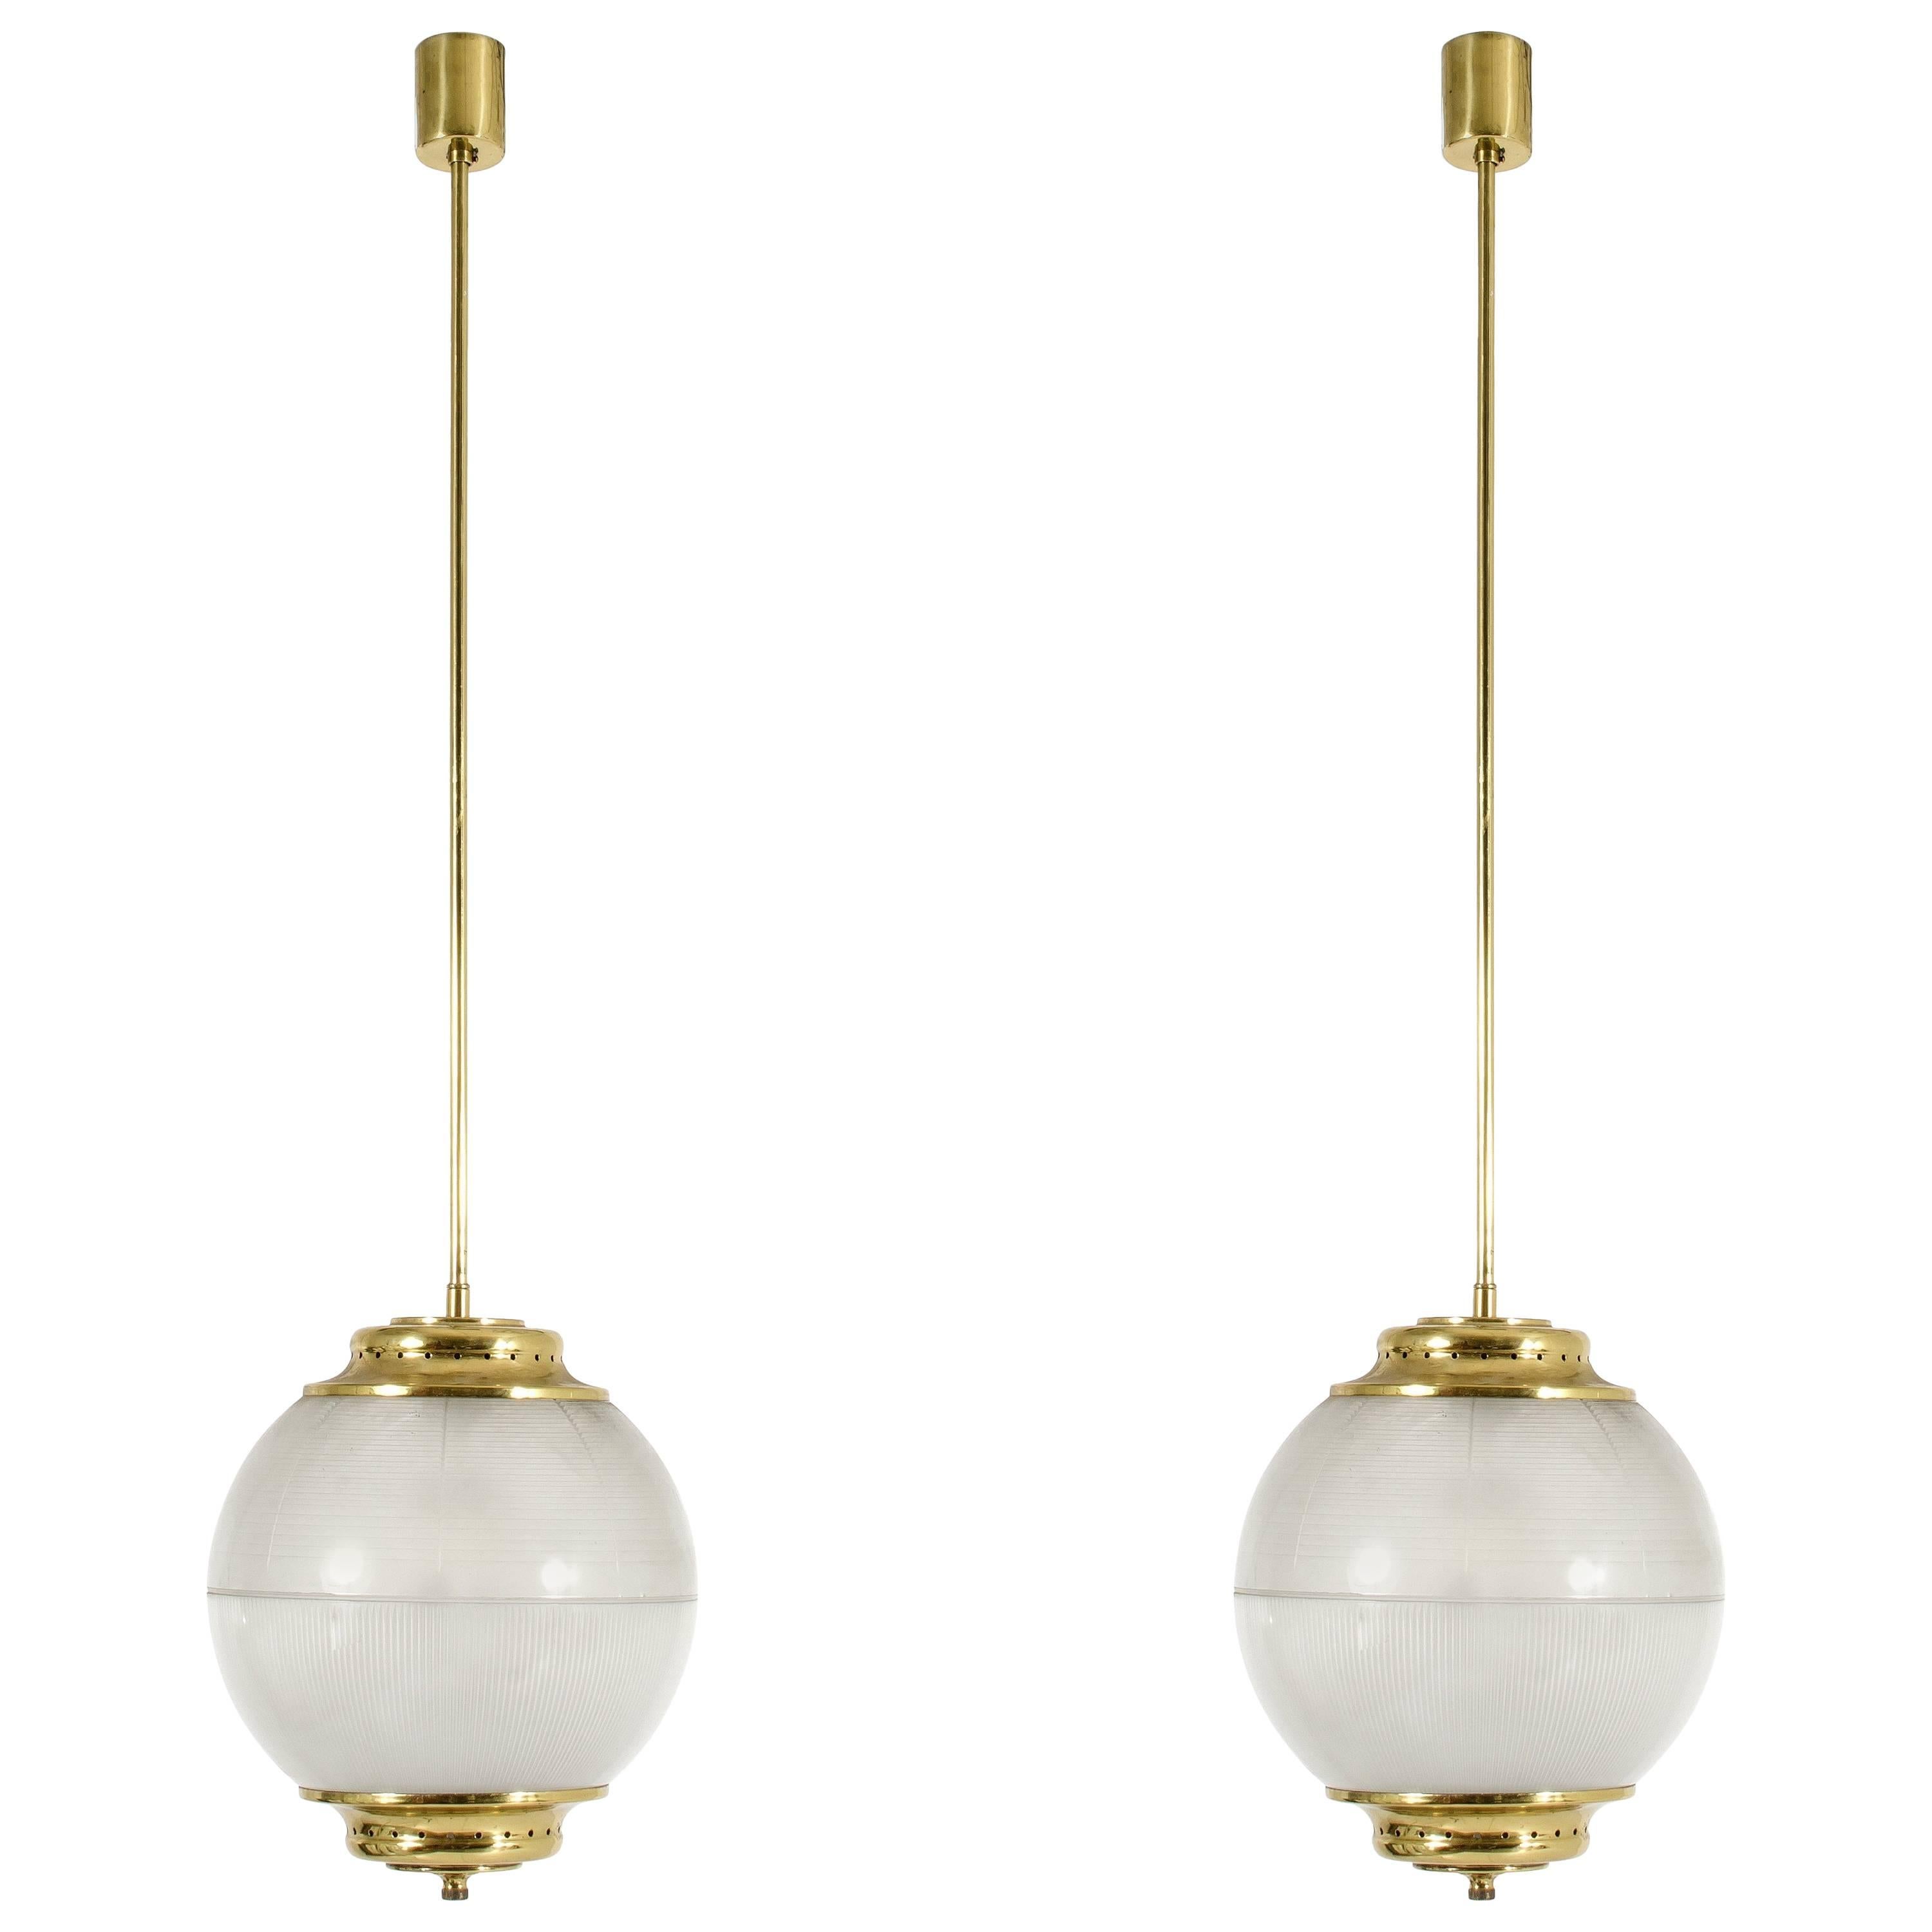 Pair of Sergio Mazza Style Chandeliers, 1950